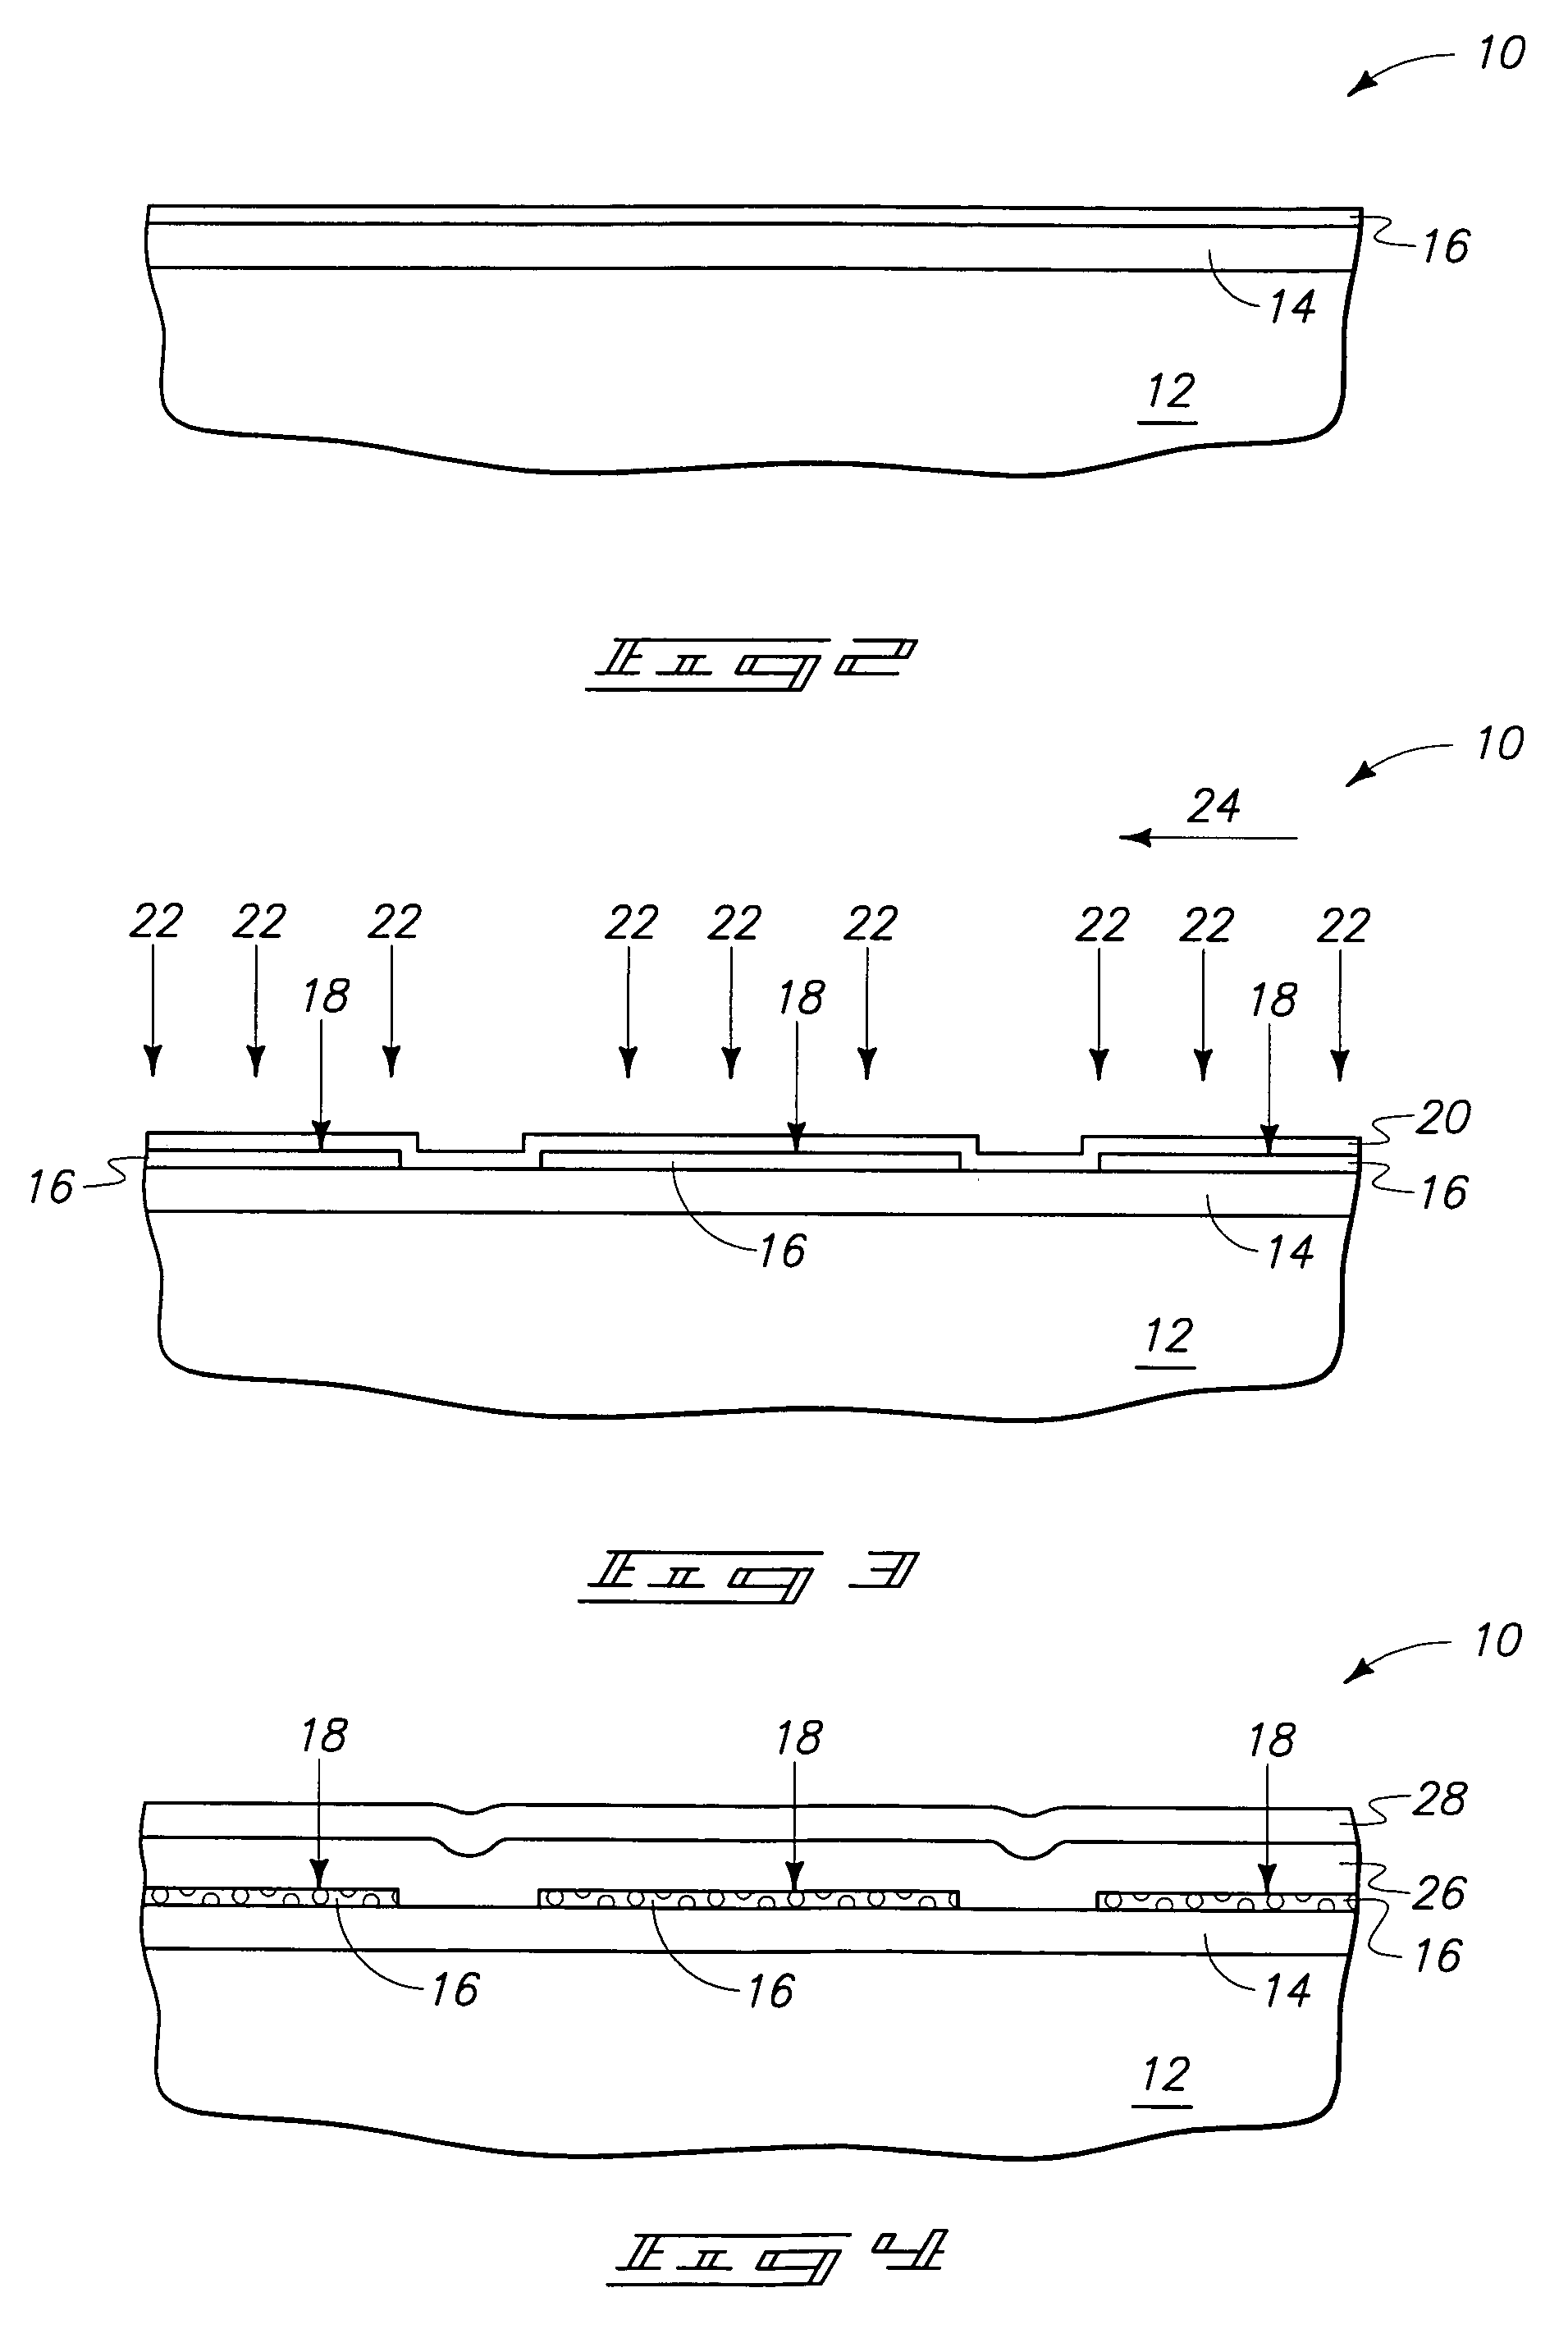 Methods of forming devices, constructions and systems comprising thyristors